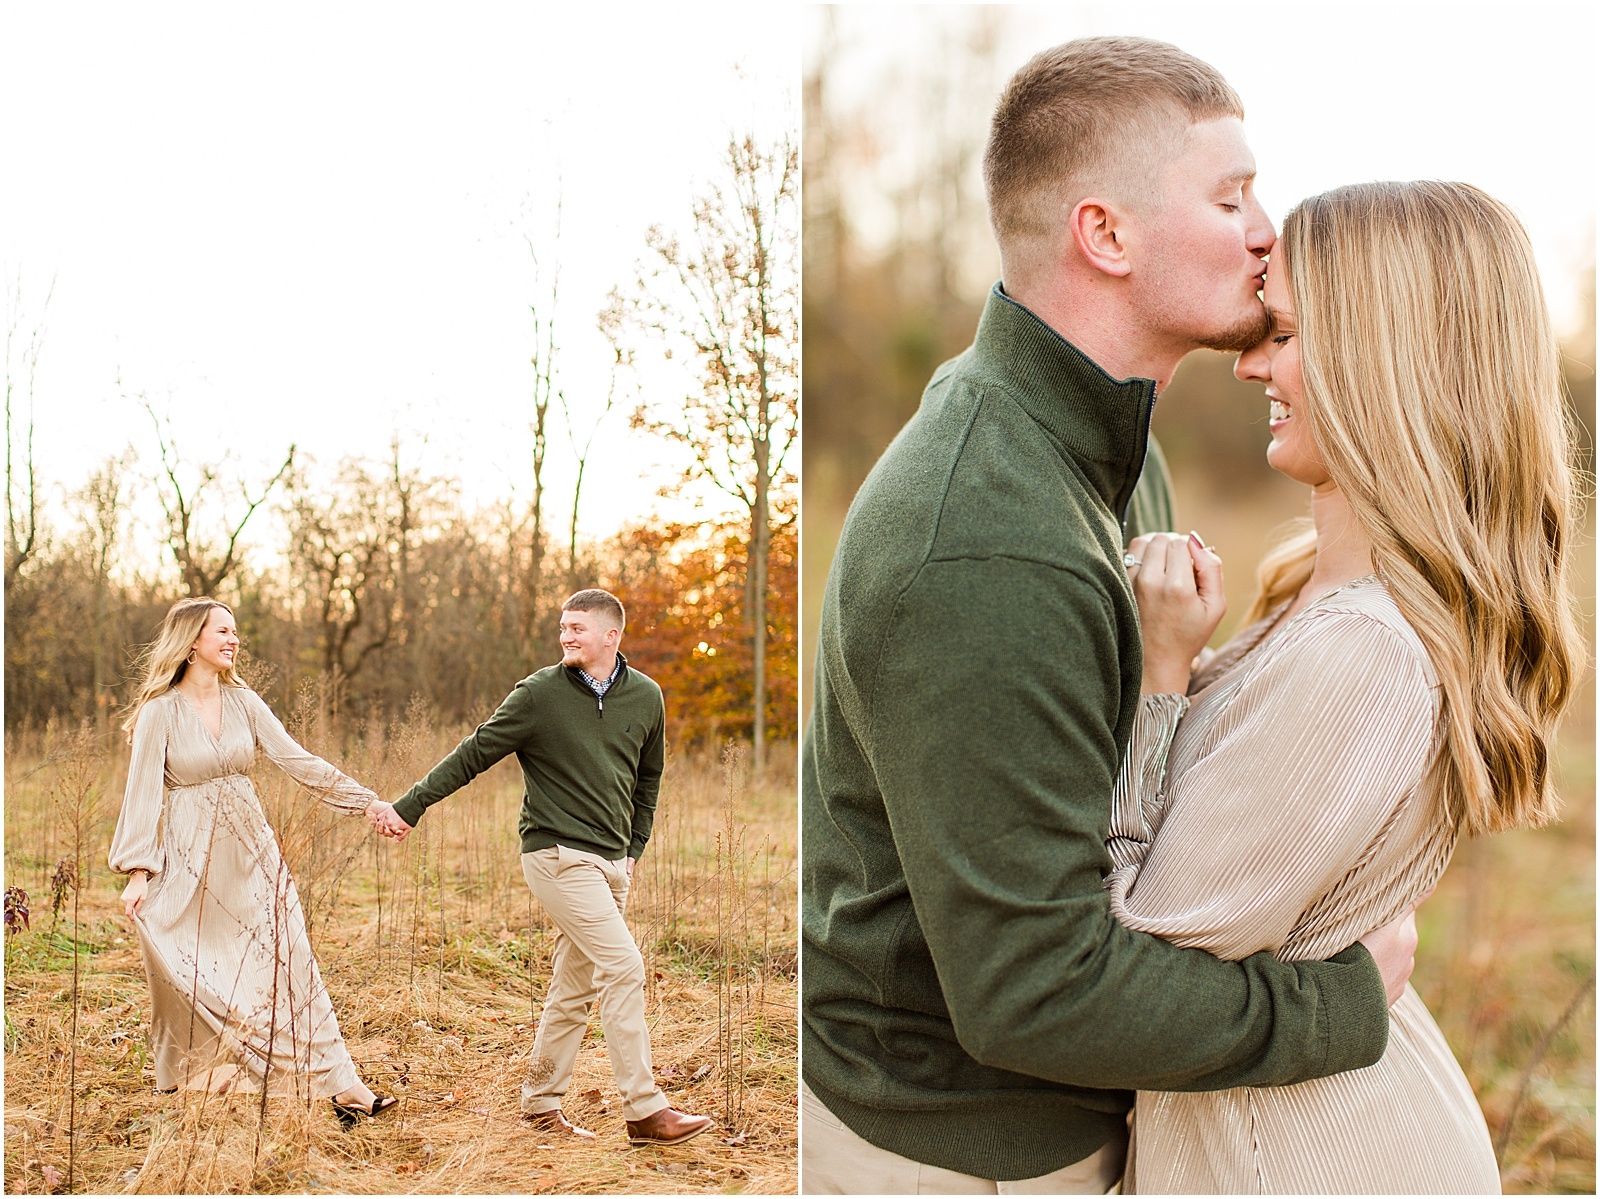 A Fall Southern Indiana Engagement Seesion | Cody and Hannah | Bret and Brandie Photography 053.jpg